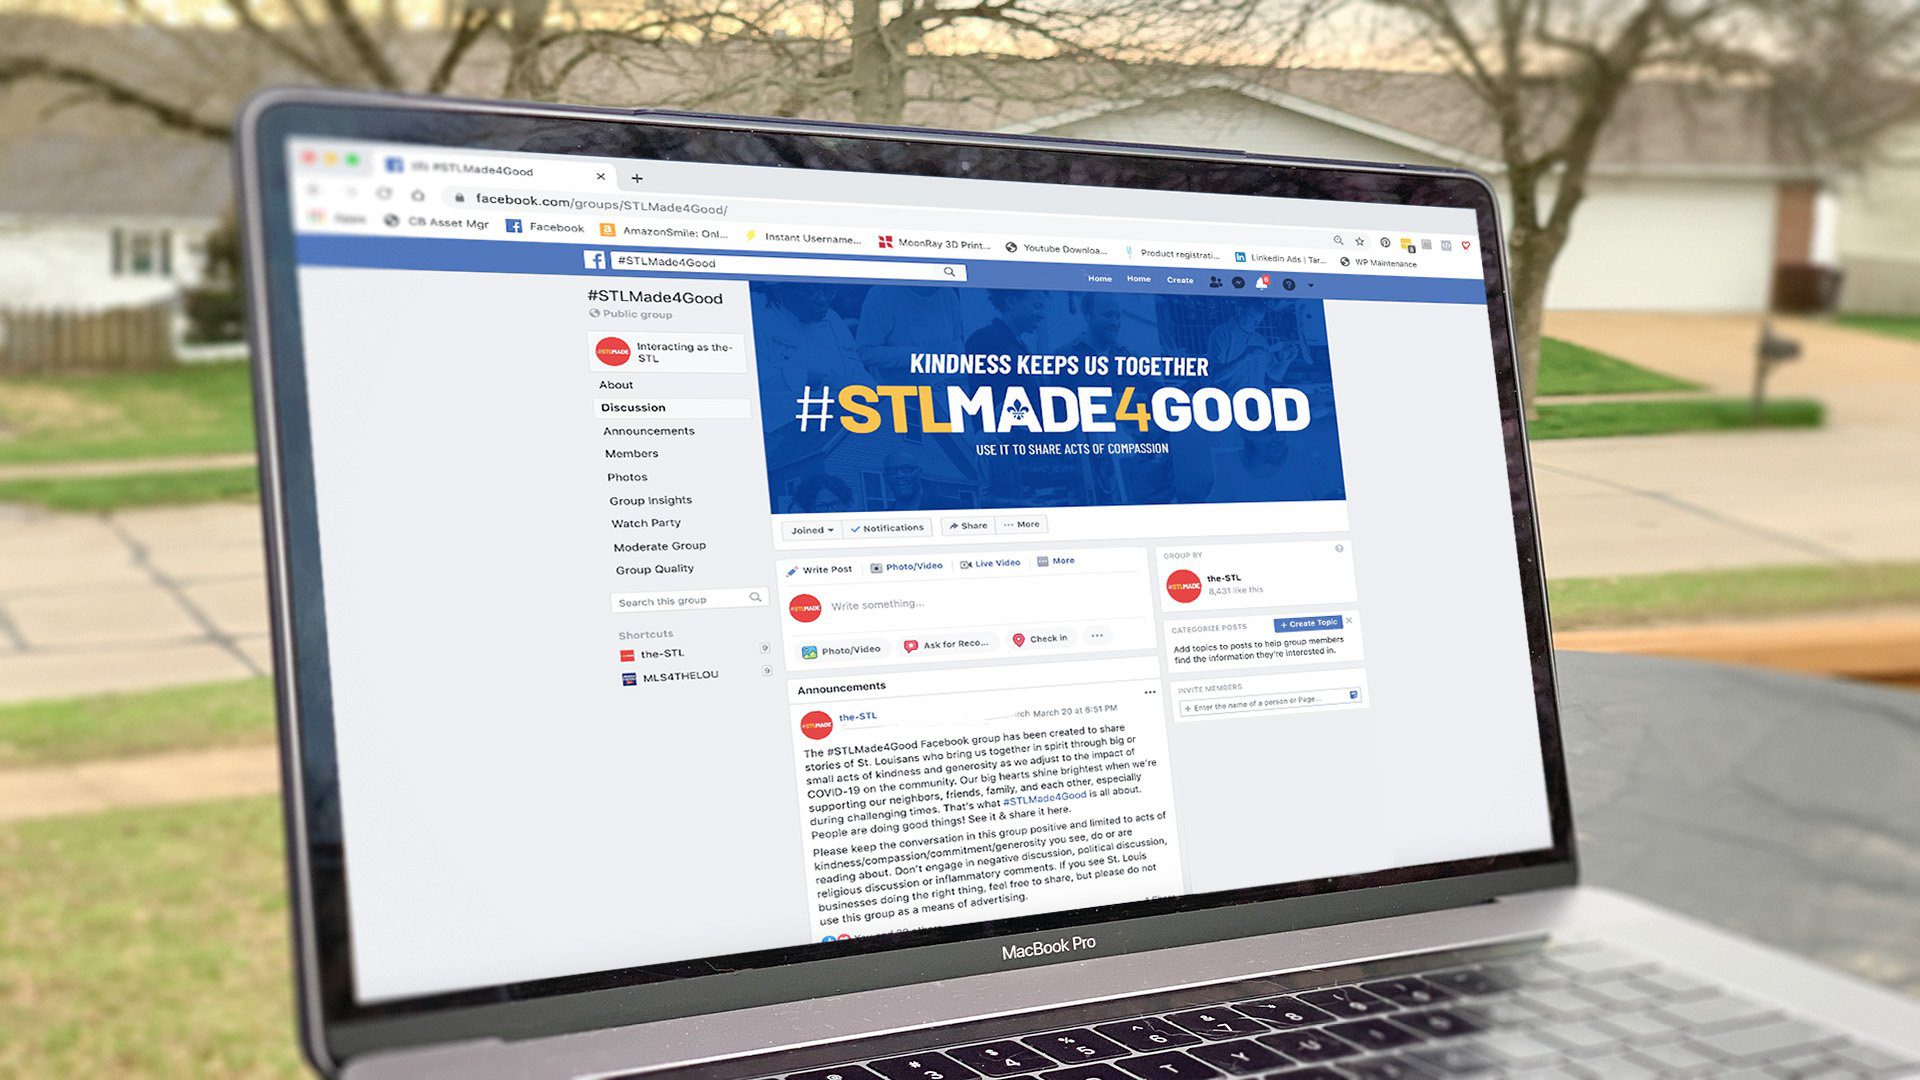 #STLMade4Good Facebook page on a computer